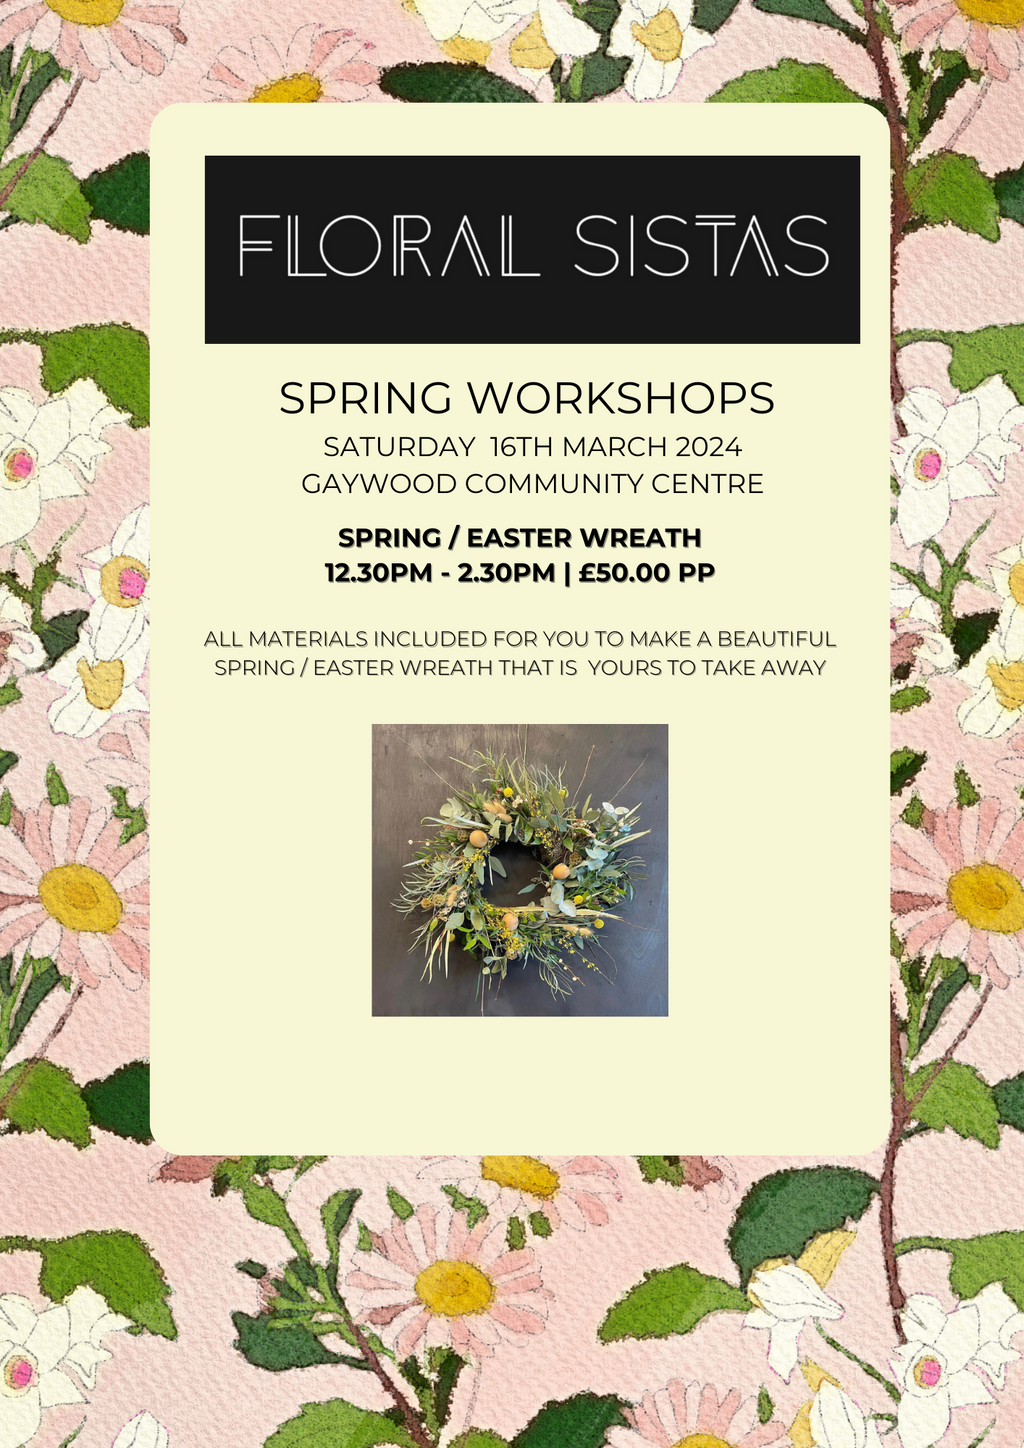 Sat 16th March 12.30 pm Spring/ Easter Wreath Workshop -